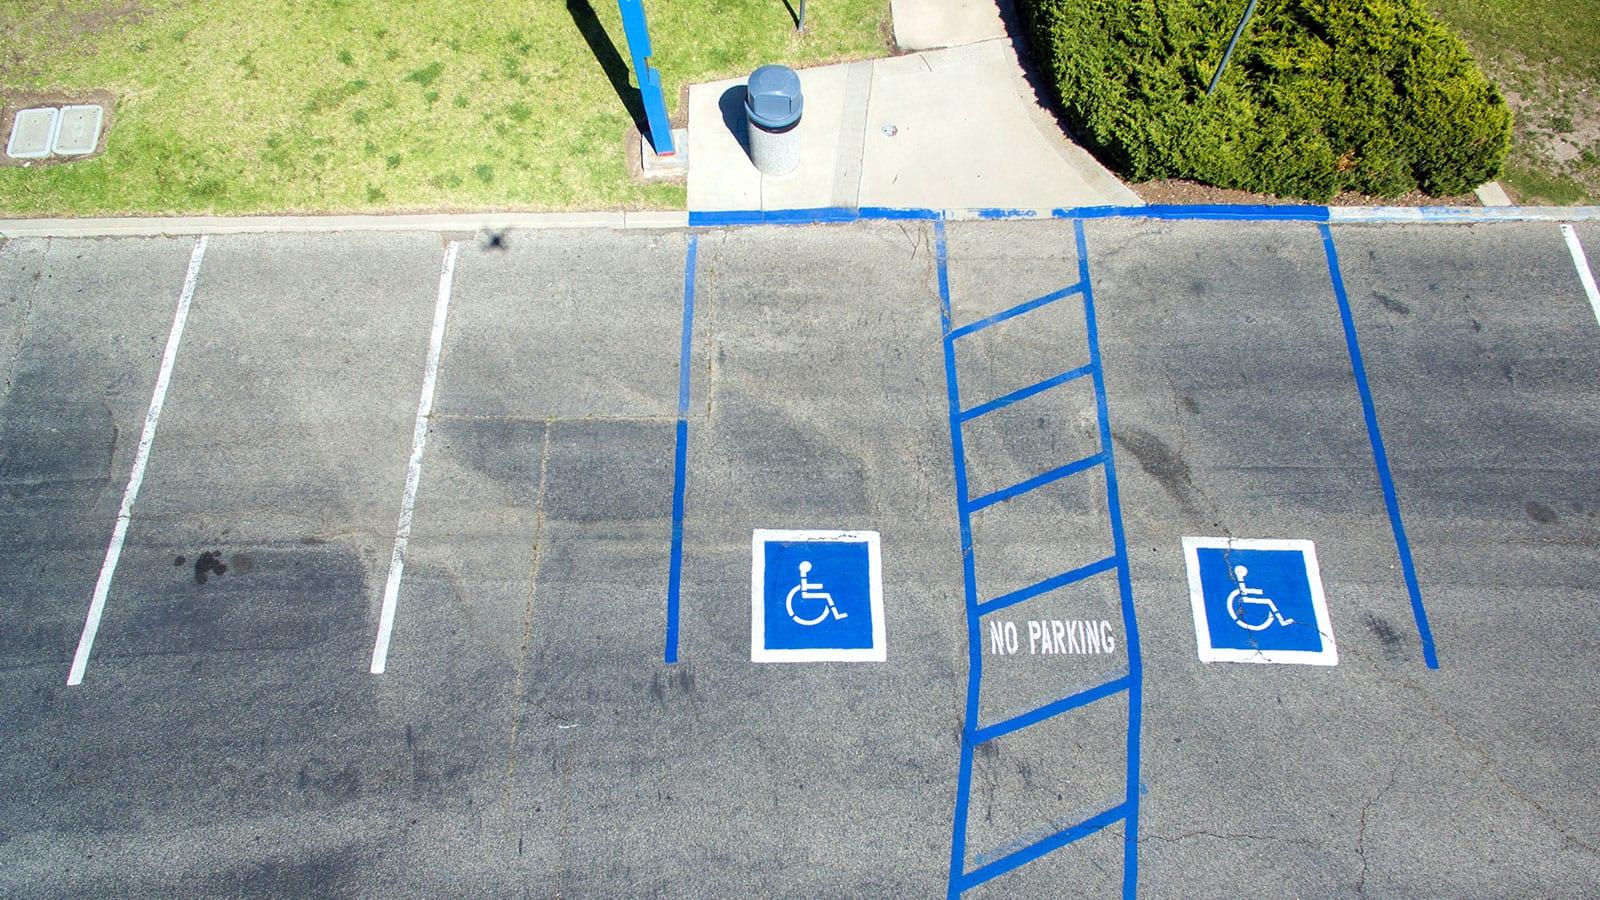 Parking area allocated for wheelchair users